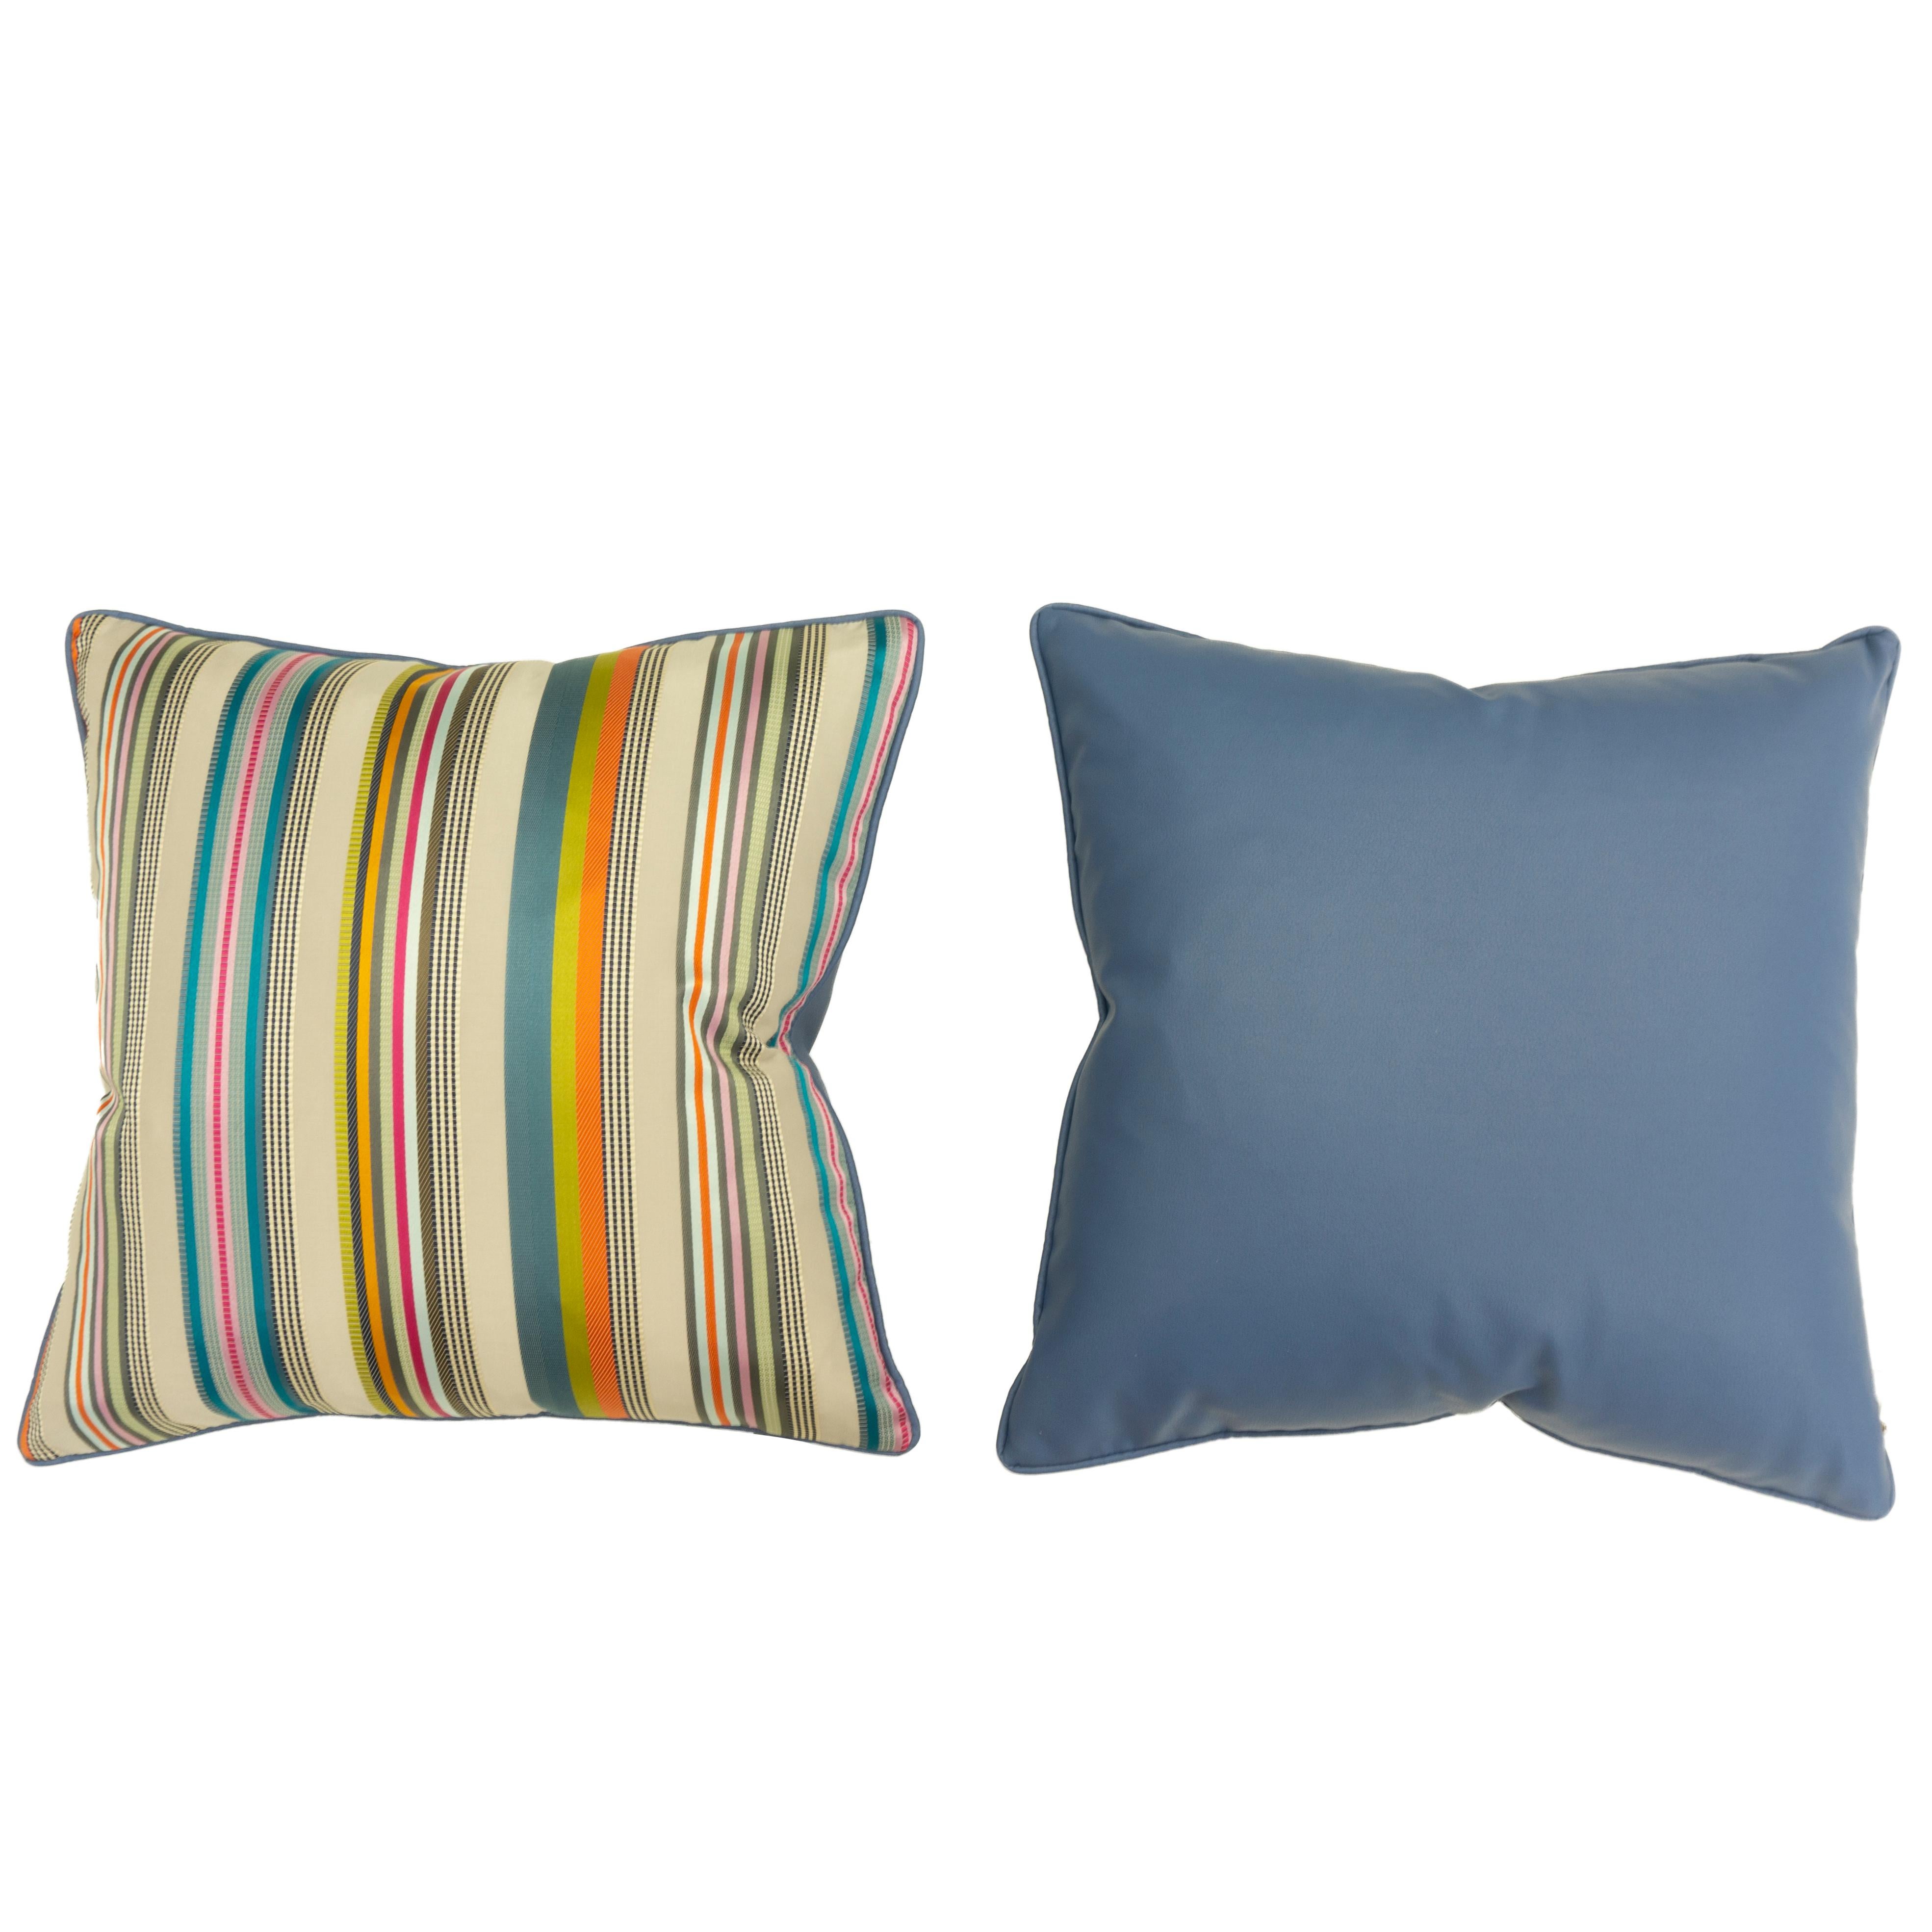 Throw Pillows with Colorful Satin Stripes 1